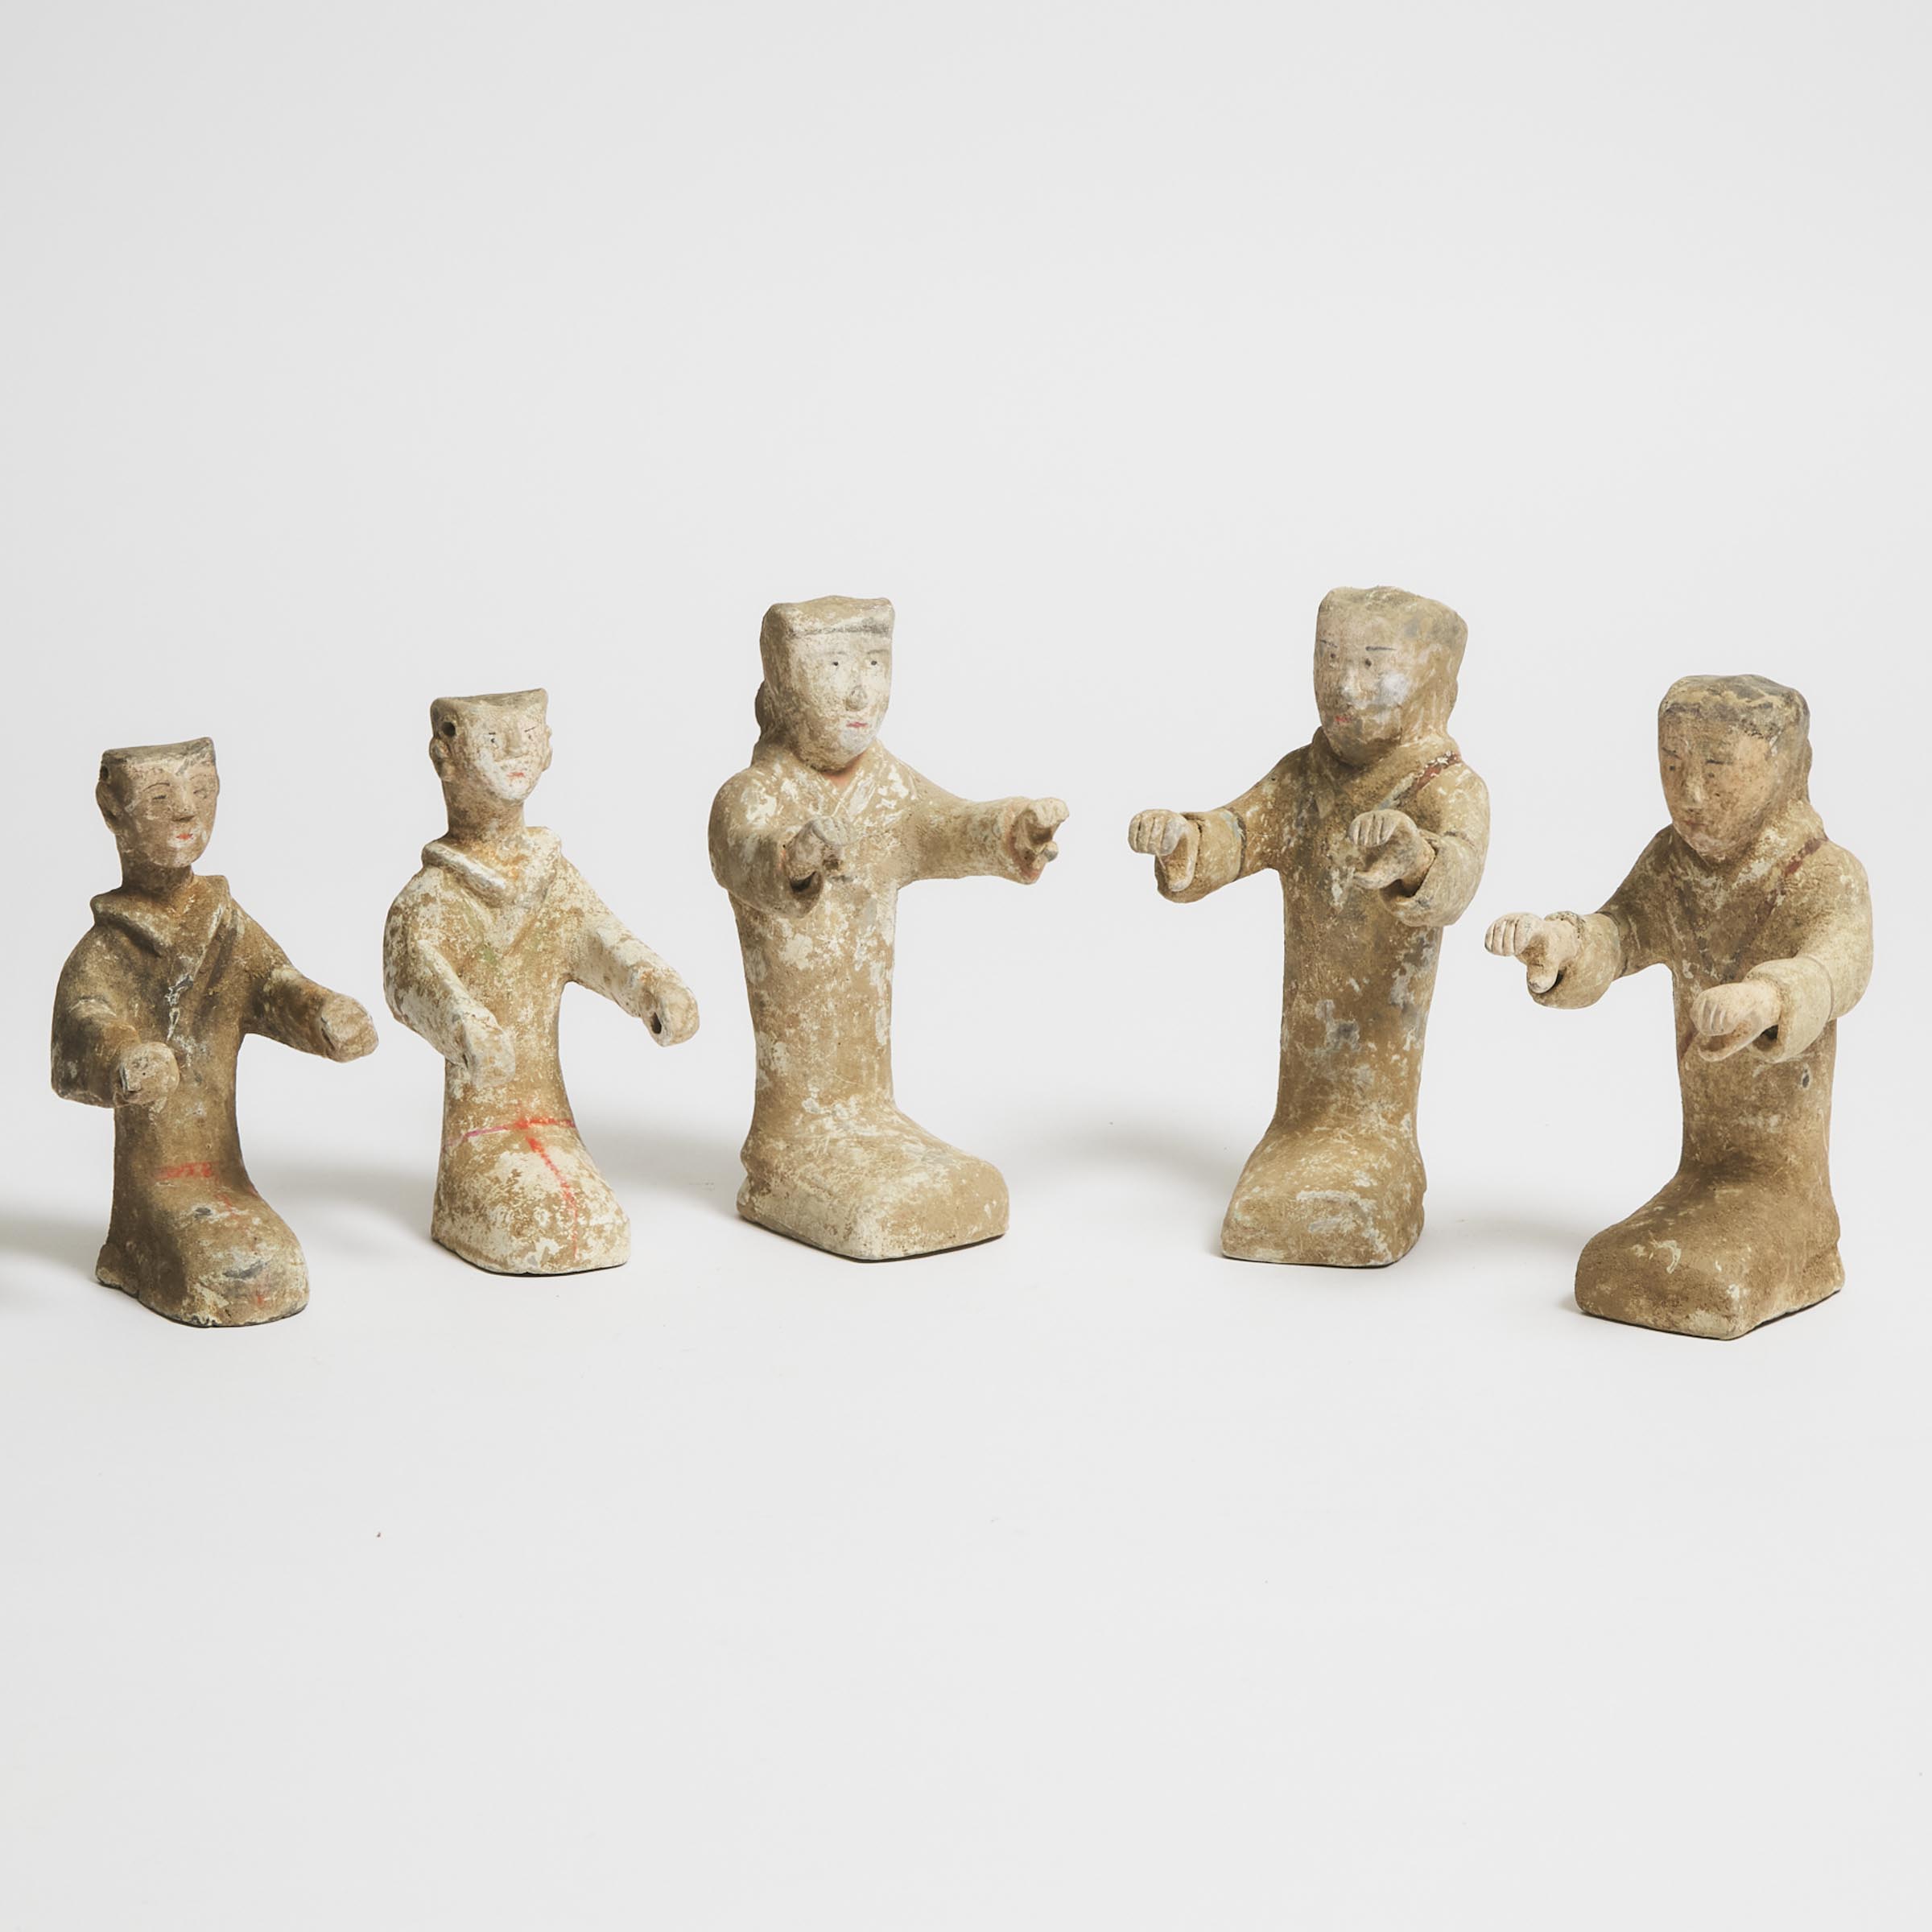 A Group of Five Painted Pottery Kneeling Figures, Han Dynasty (206 BC-AD 220)